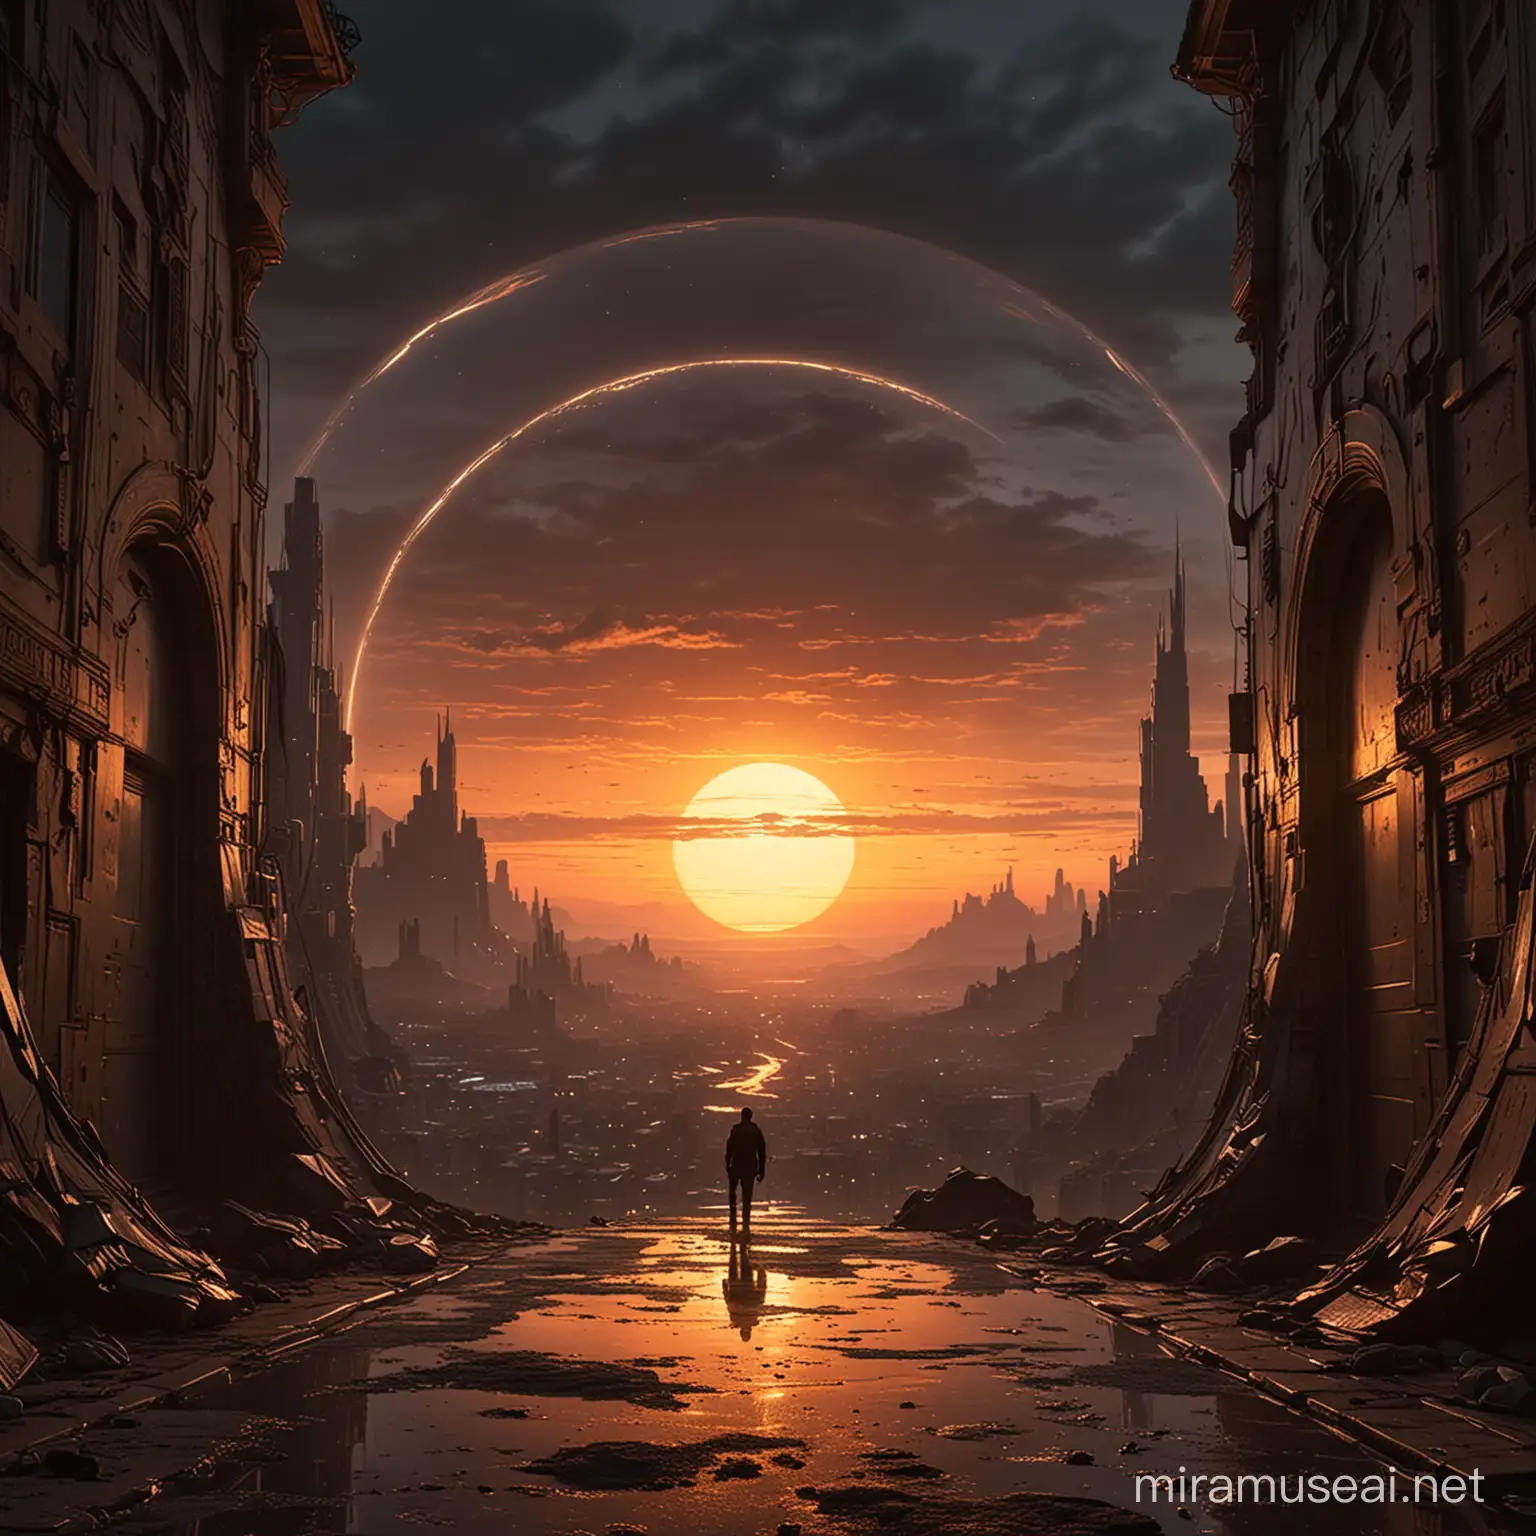 light painting, convex, Sunsets, art by annibale carracci, scroll painting, Sci-Fi Zoom Backgrounds, zoom, dream world, dark fantasy, scenes in the style of blade runner 2049